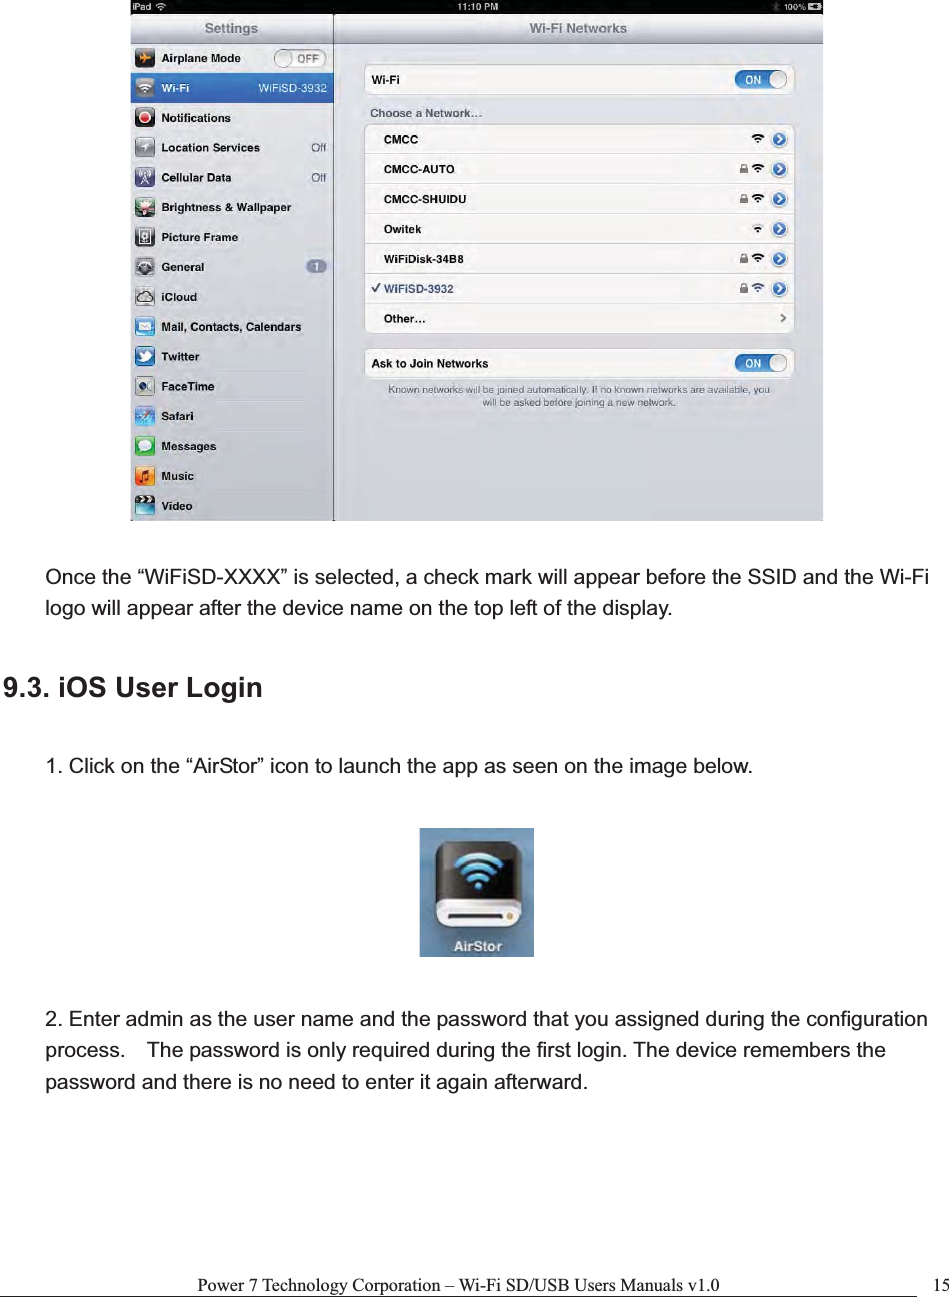 Power 7 Technology Corporation – Wi-Fi SD/USB Users Manuals v1.0  15Once the “WiFiSD-XXXX” is selected, a check mark will appear before the SSID and the Wi-Fi logo will appear after the device name on the top left of the display. 9.3. iOS User Login 1. Click on the “AirStor” icon to launch the app as seen on the image below.2. Enter admin as the user name and the password that you assigned during the configuration process.    The password is only required during the first login. The device remembers the password and there is no need to enter it again afterward. 